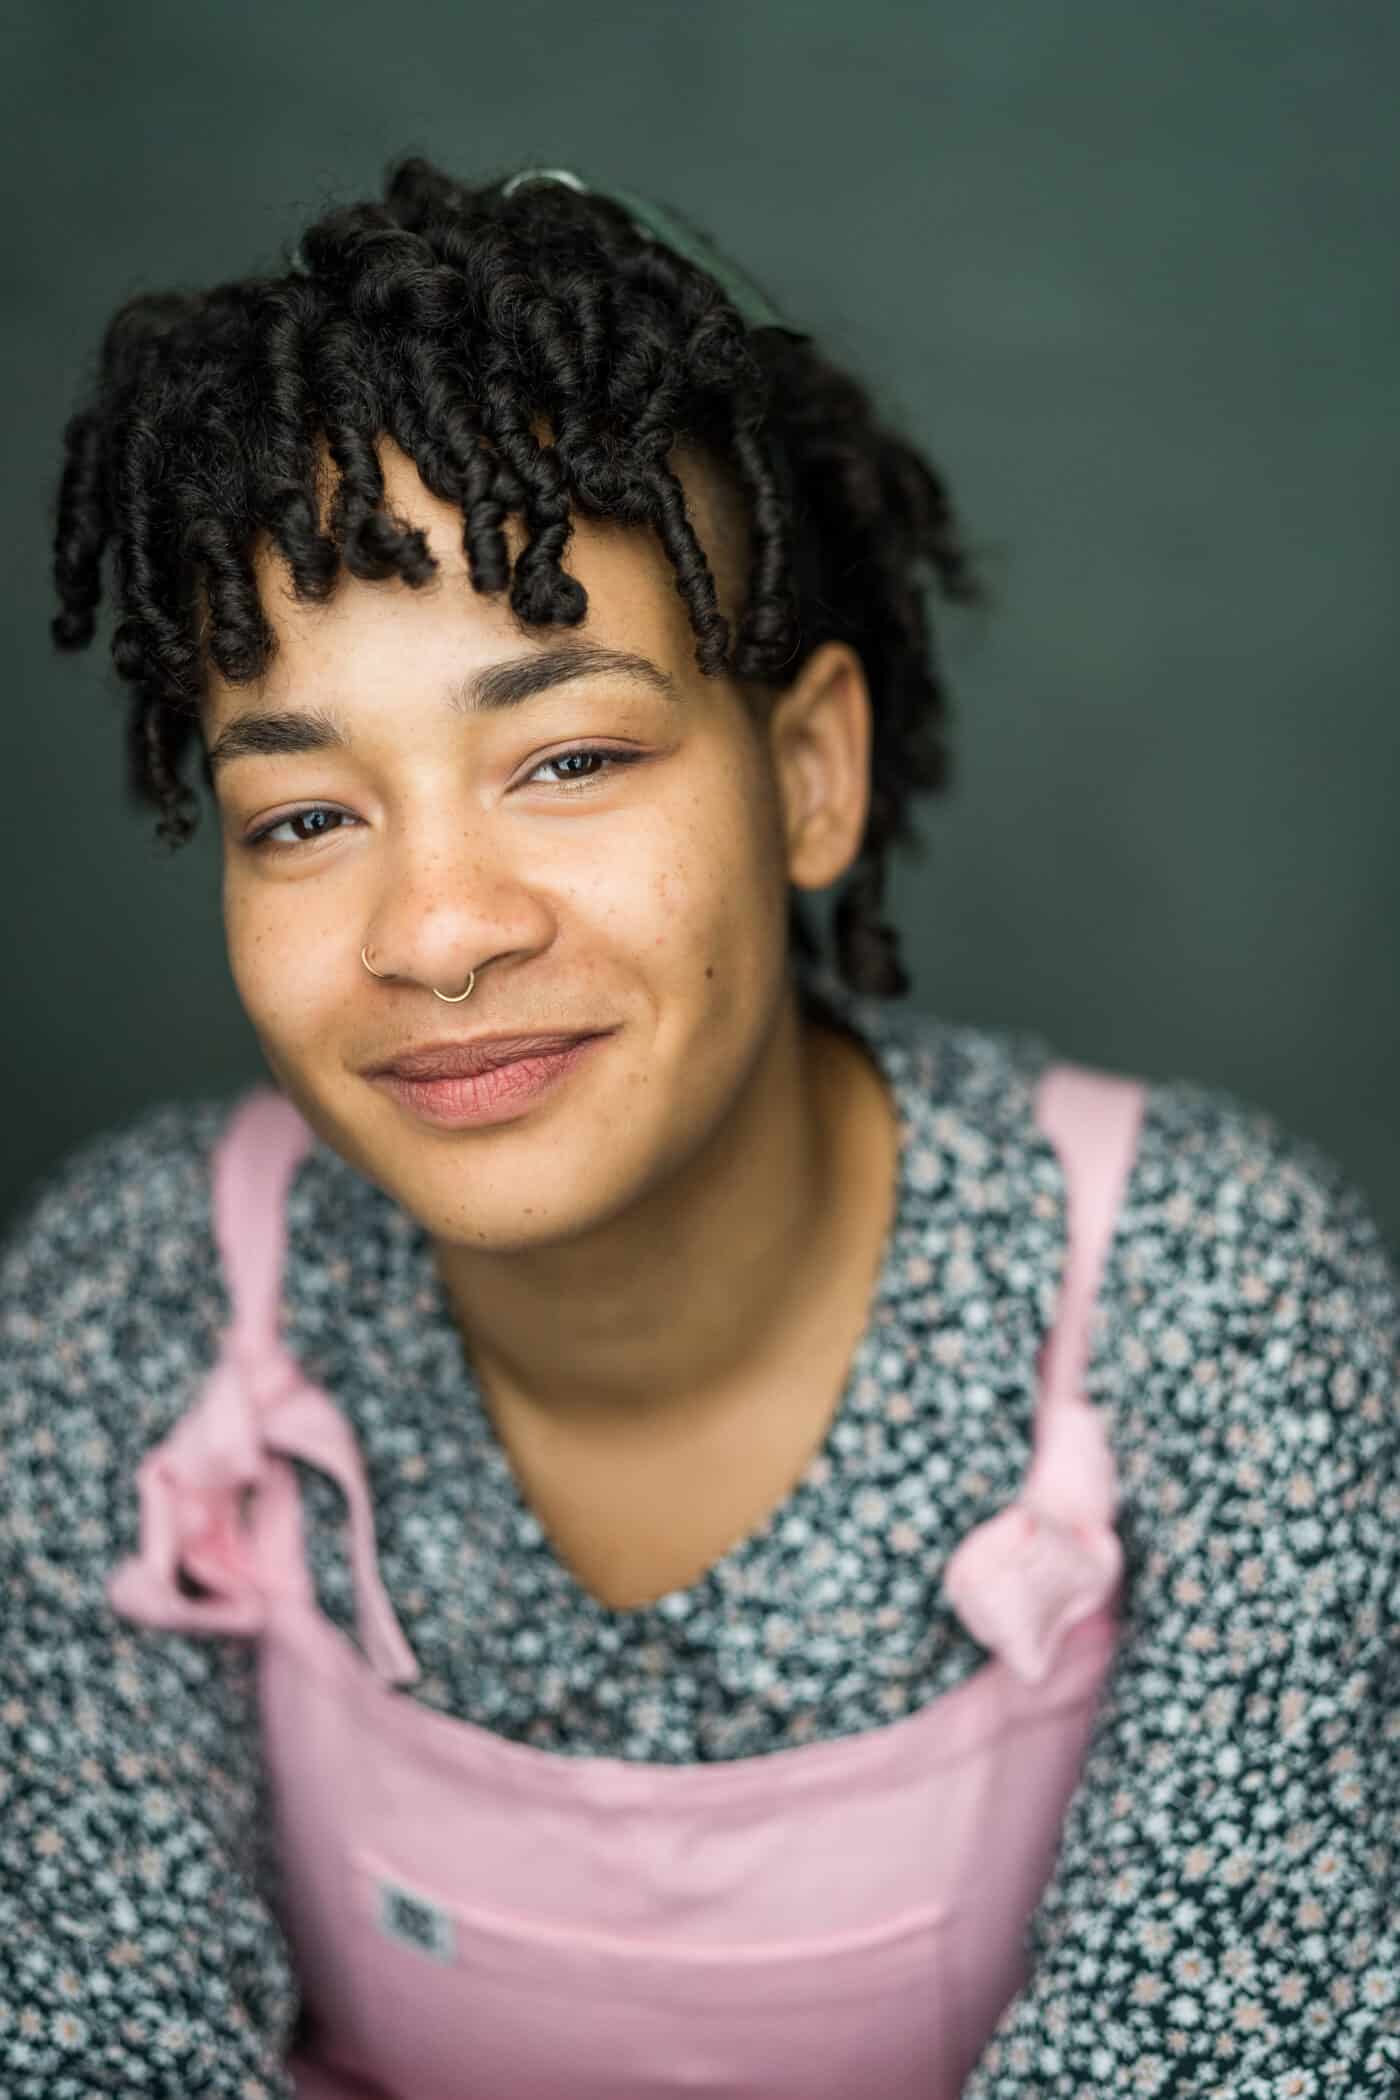 A lighter skinned Black non-binary person in pink dunagrees and a dark green floral shirt leans towards the camera. They are smiling and have ringlets covering their forehead.